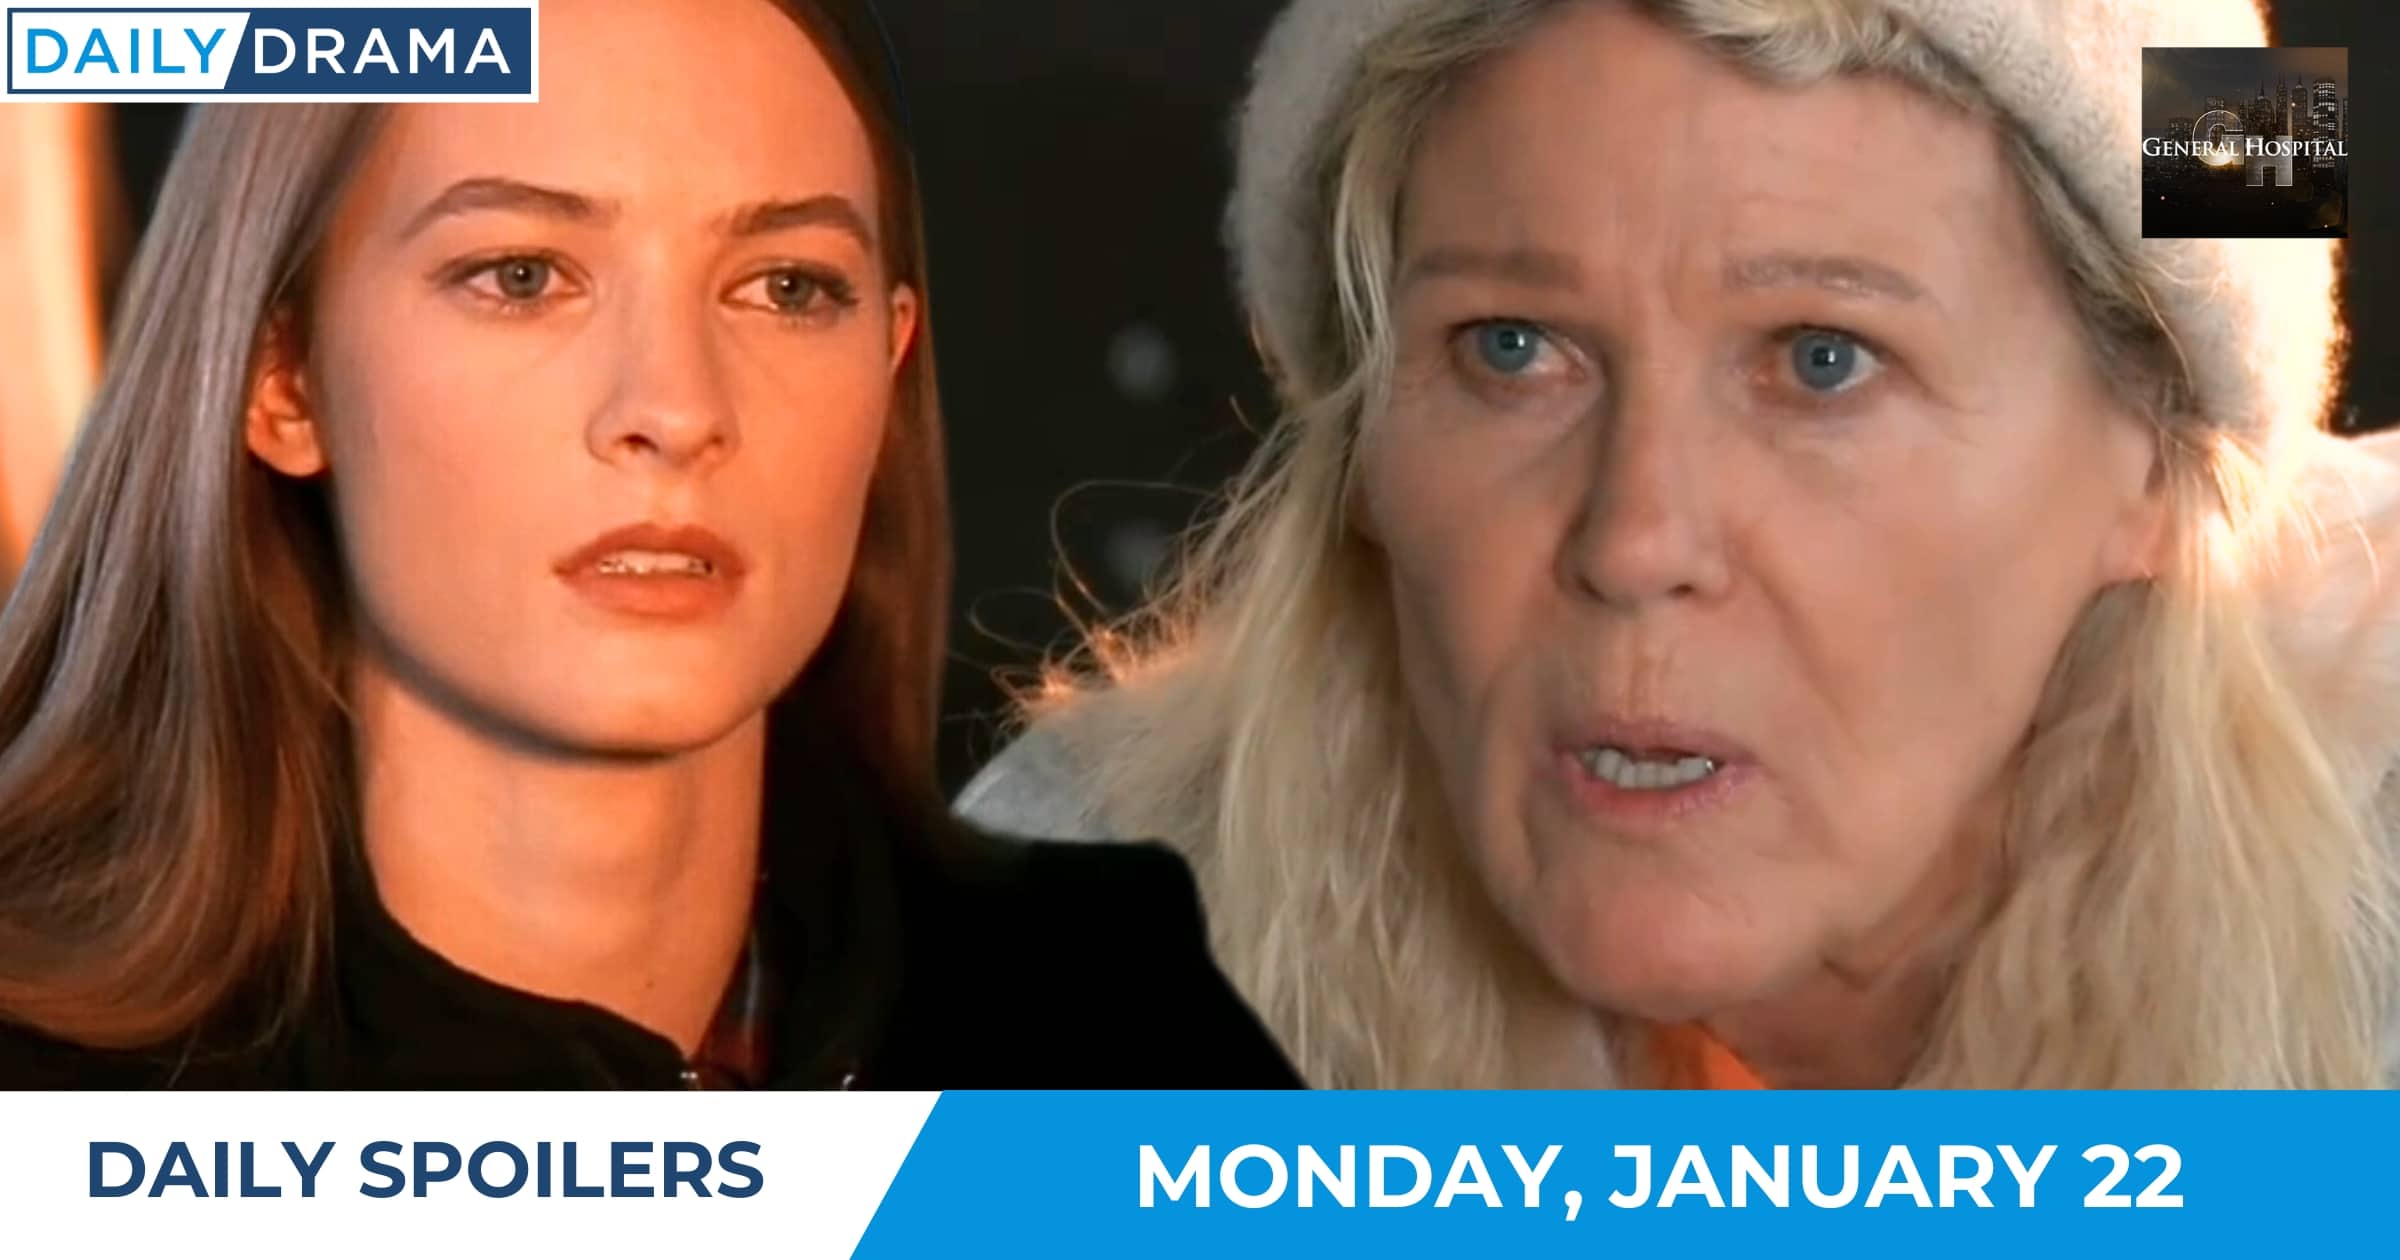 General Hospital Daily Spoilers - Jan 22 - Esme and Heather